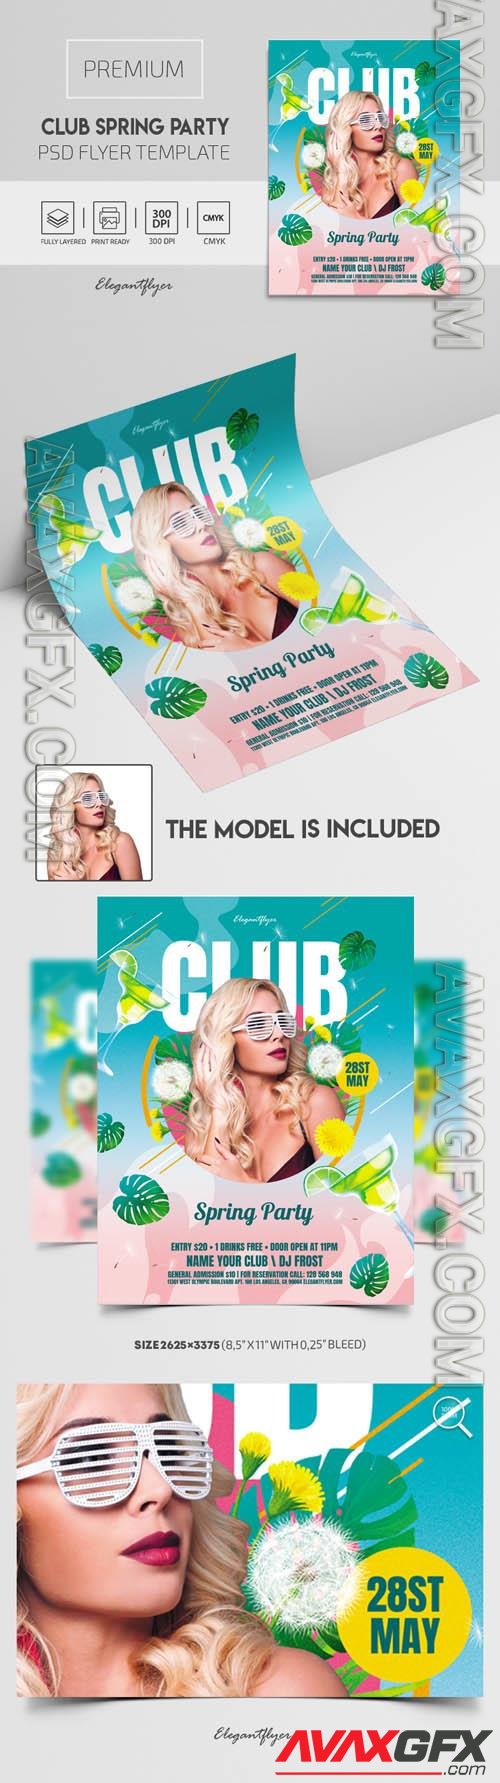 Club Spring Party Flyer PSD Template